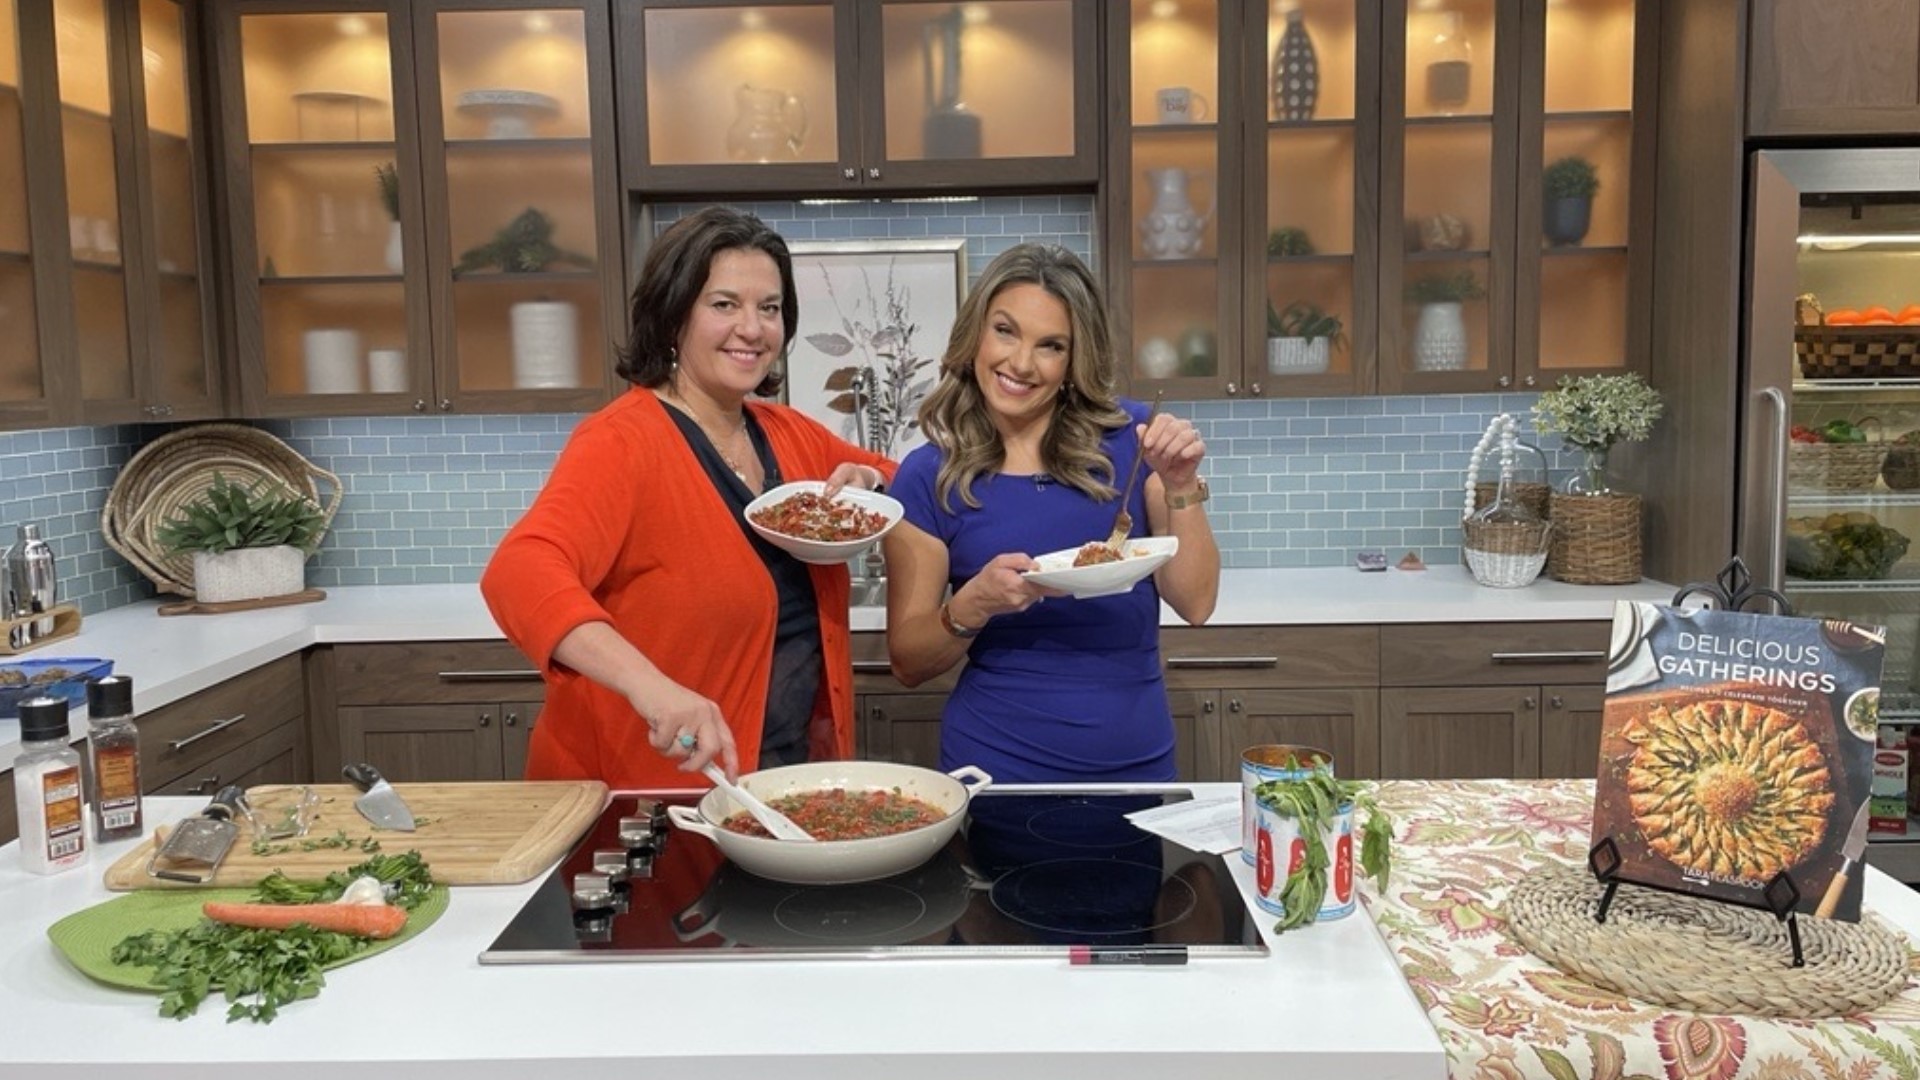 Producer Suzie Wiley joined Amity in the New Day kitchen to make a quick marinara sauce and try it with giant dinner meatballs! #newdaynw